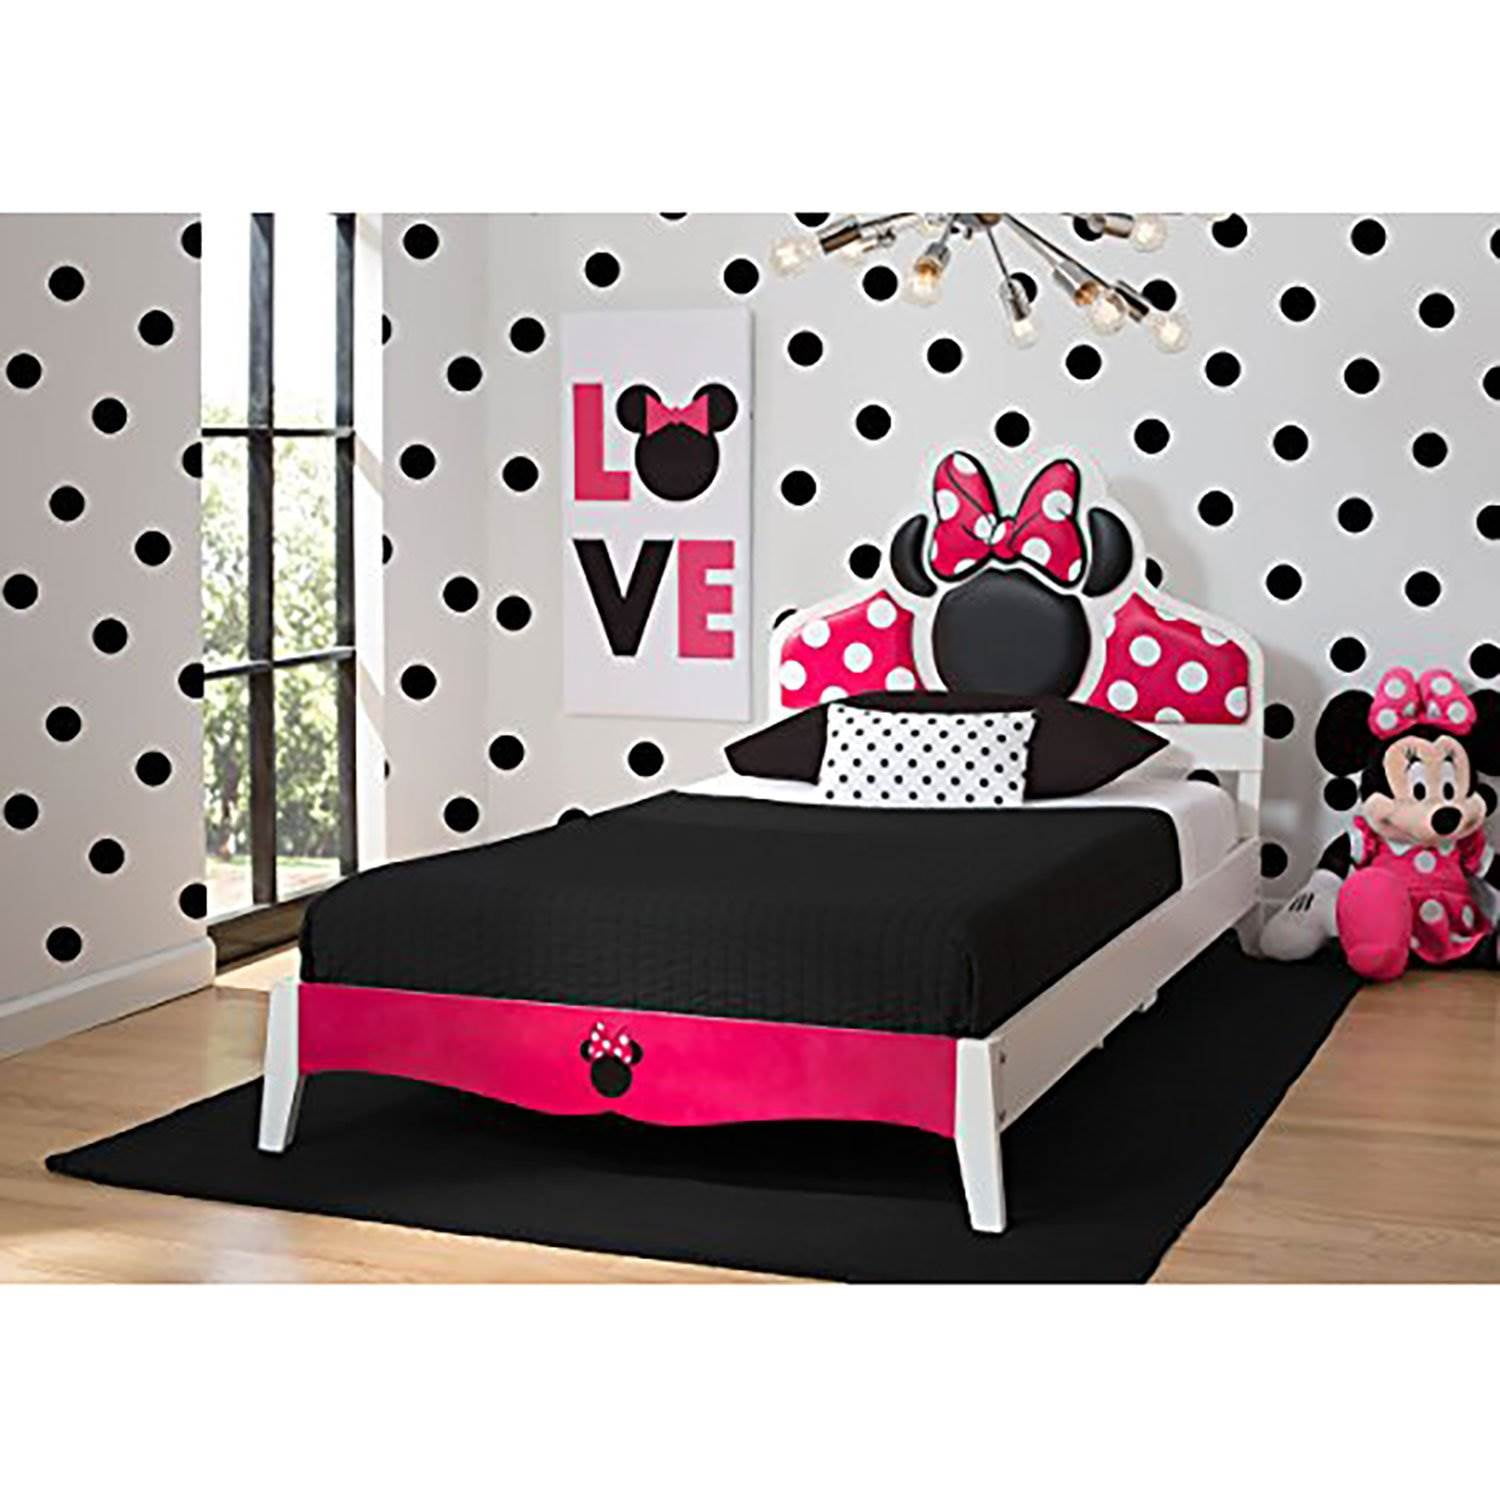 delta minnie mouse twin bed